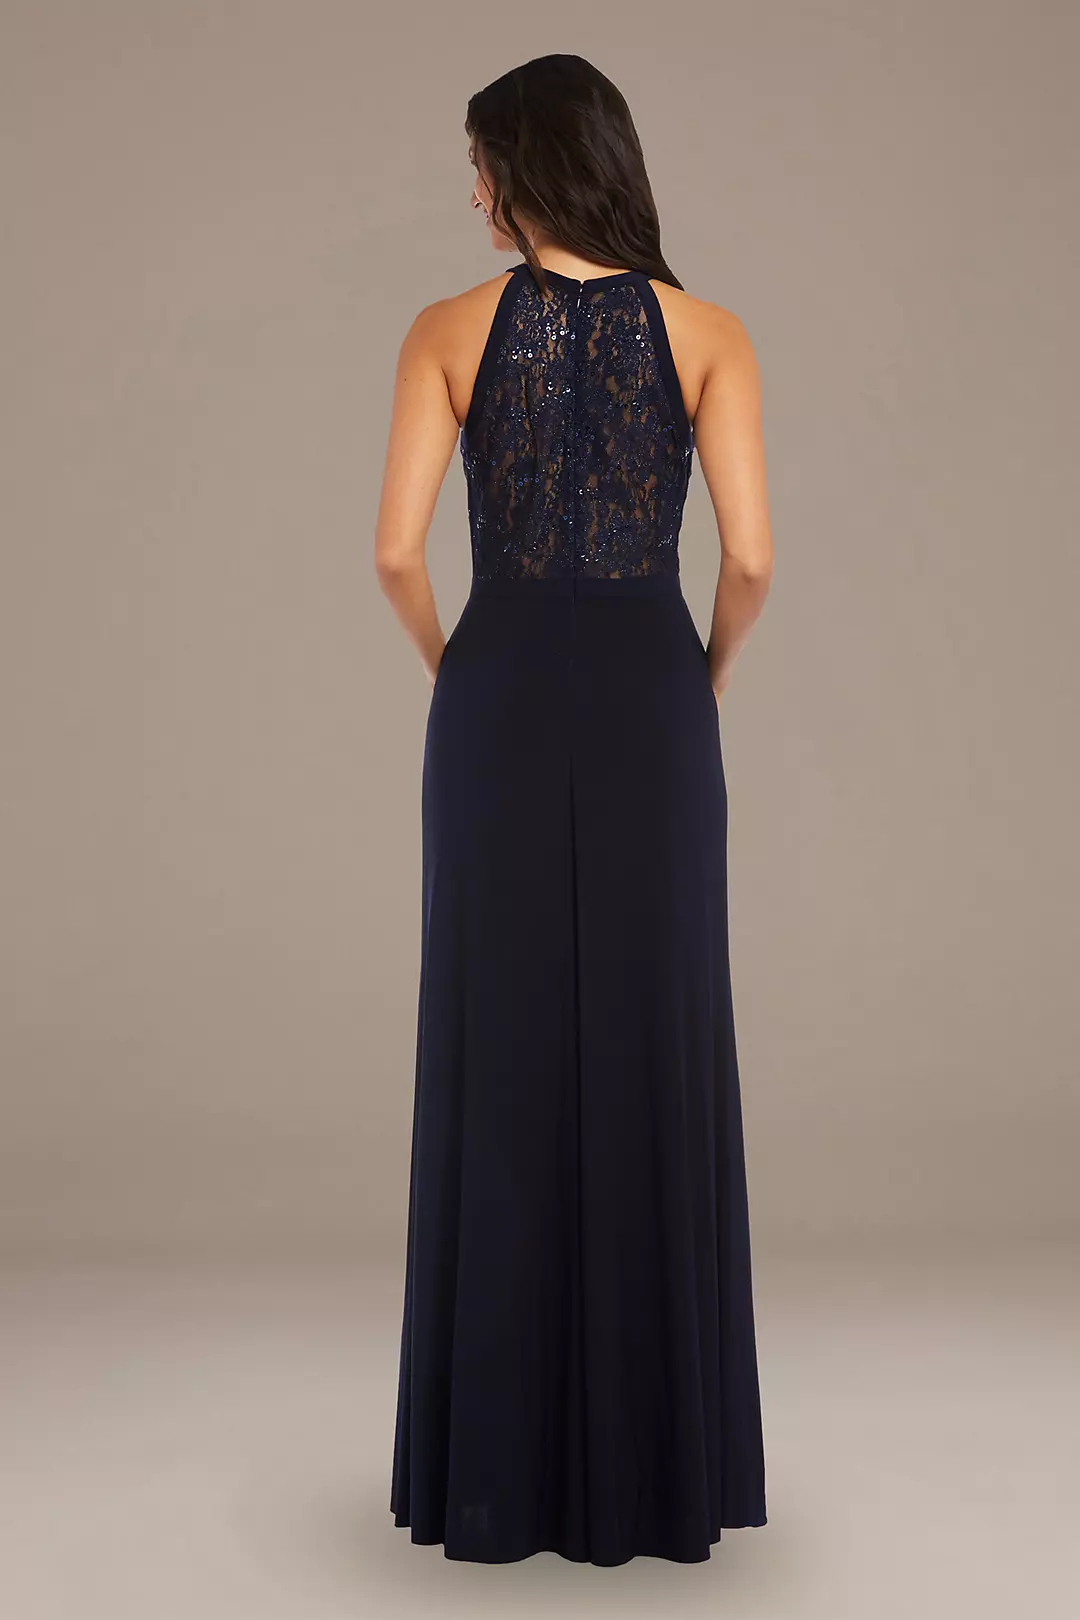 Long Halter Lace Dress with Illusion Cutout Image 2